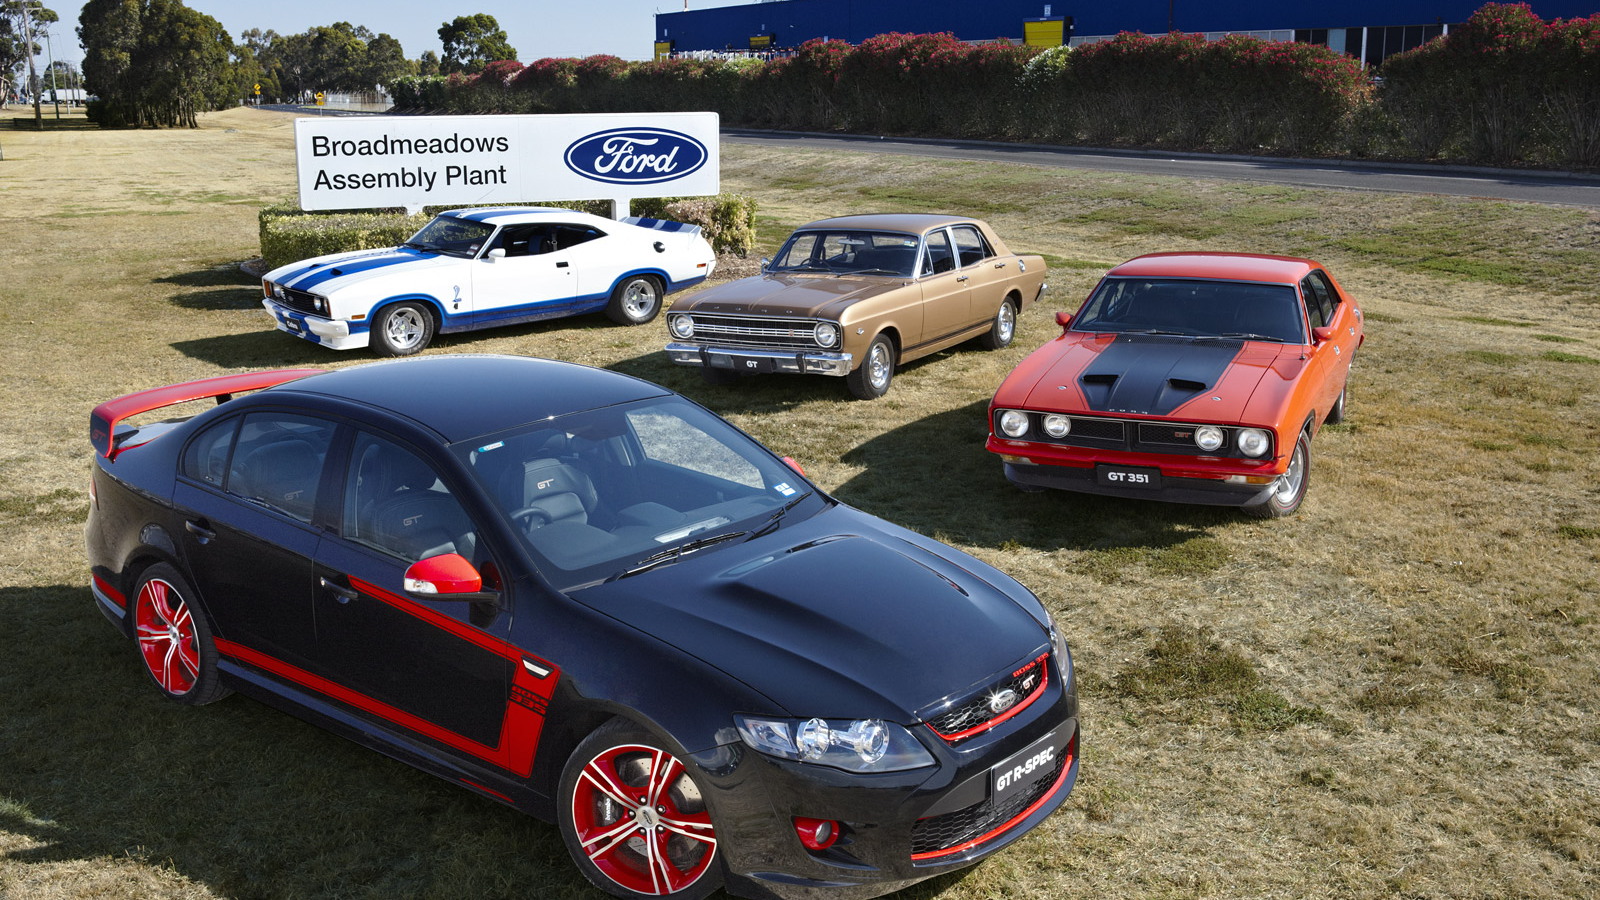 Ford starts production of FPV Falcon sedans at its own plant